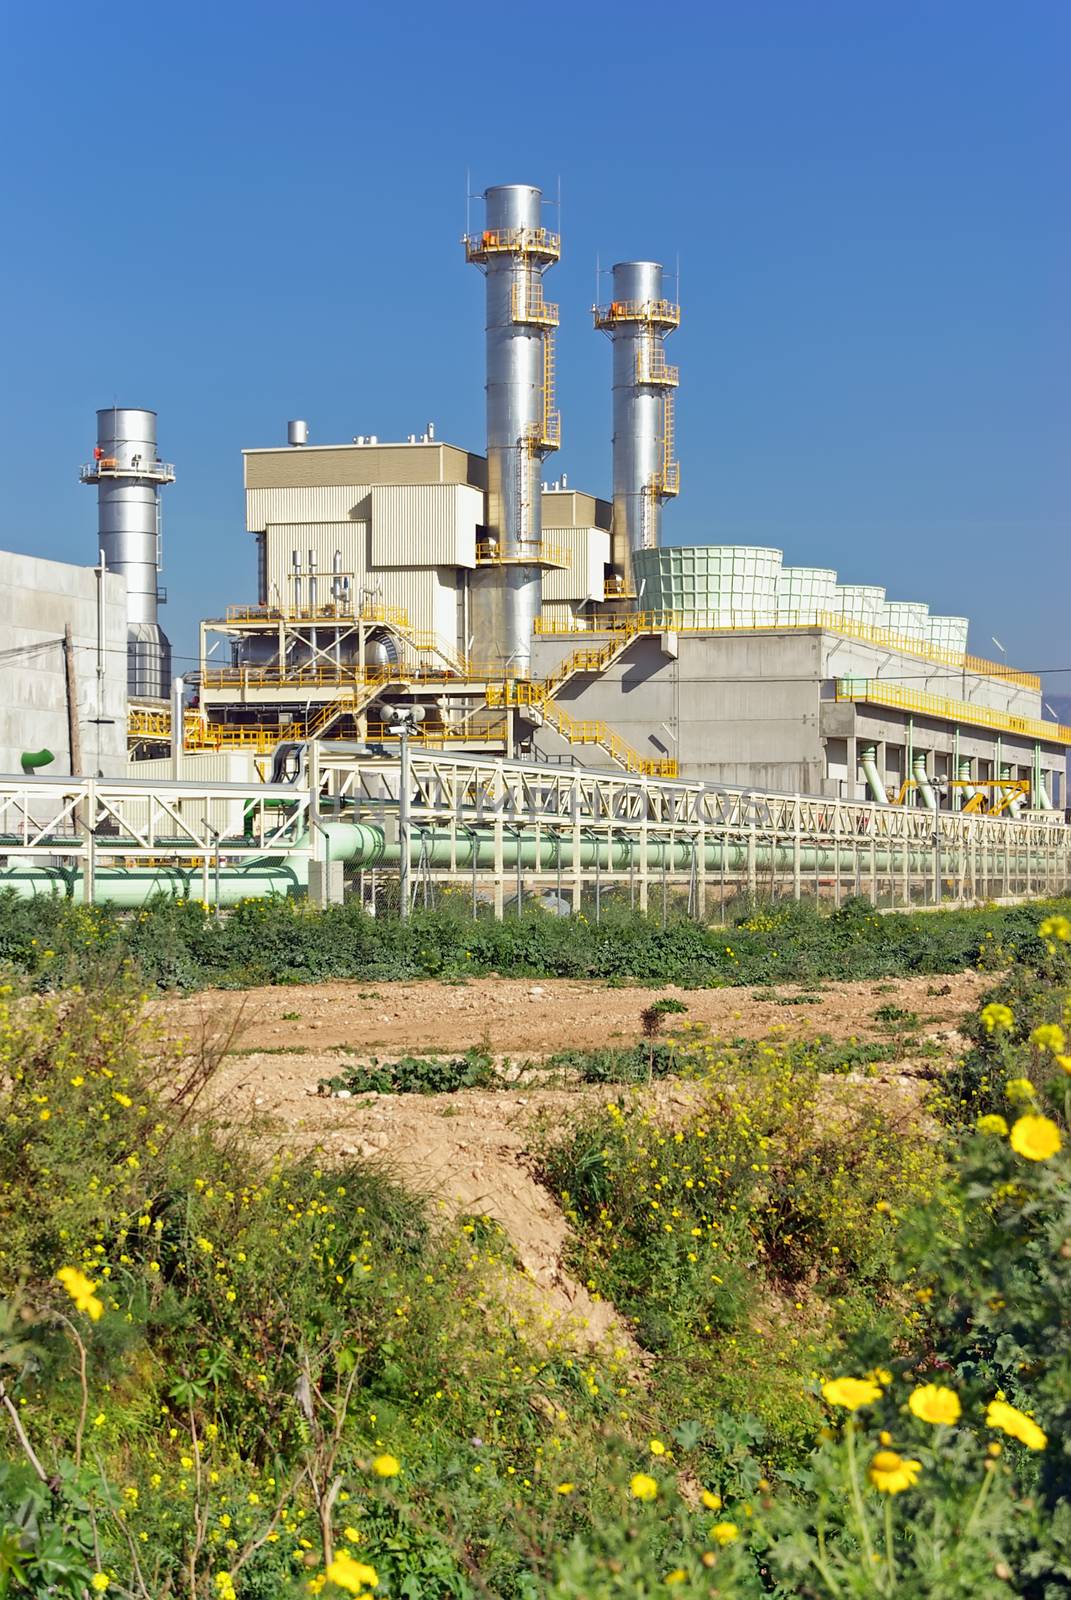 Power plant located in Majorca (Spain) to produce electricity